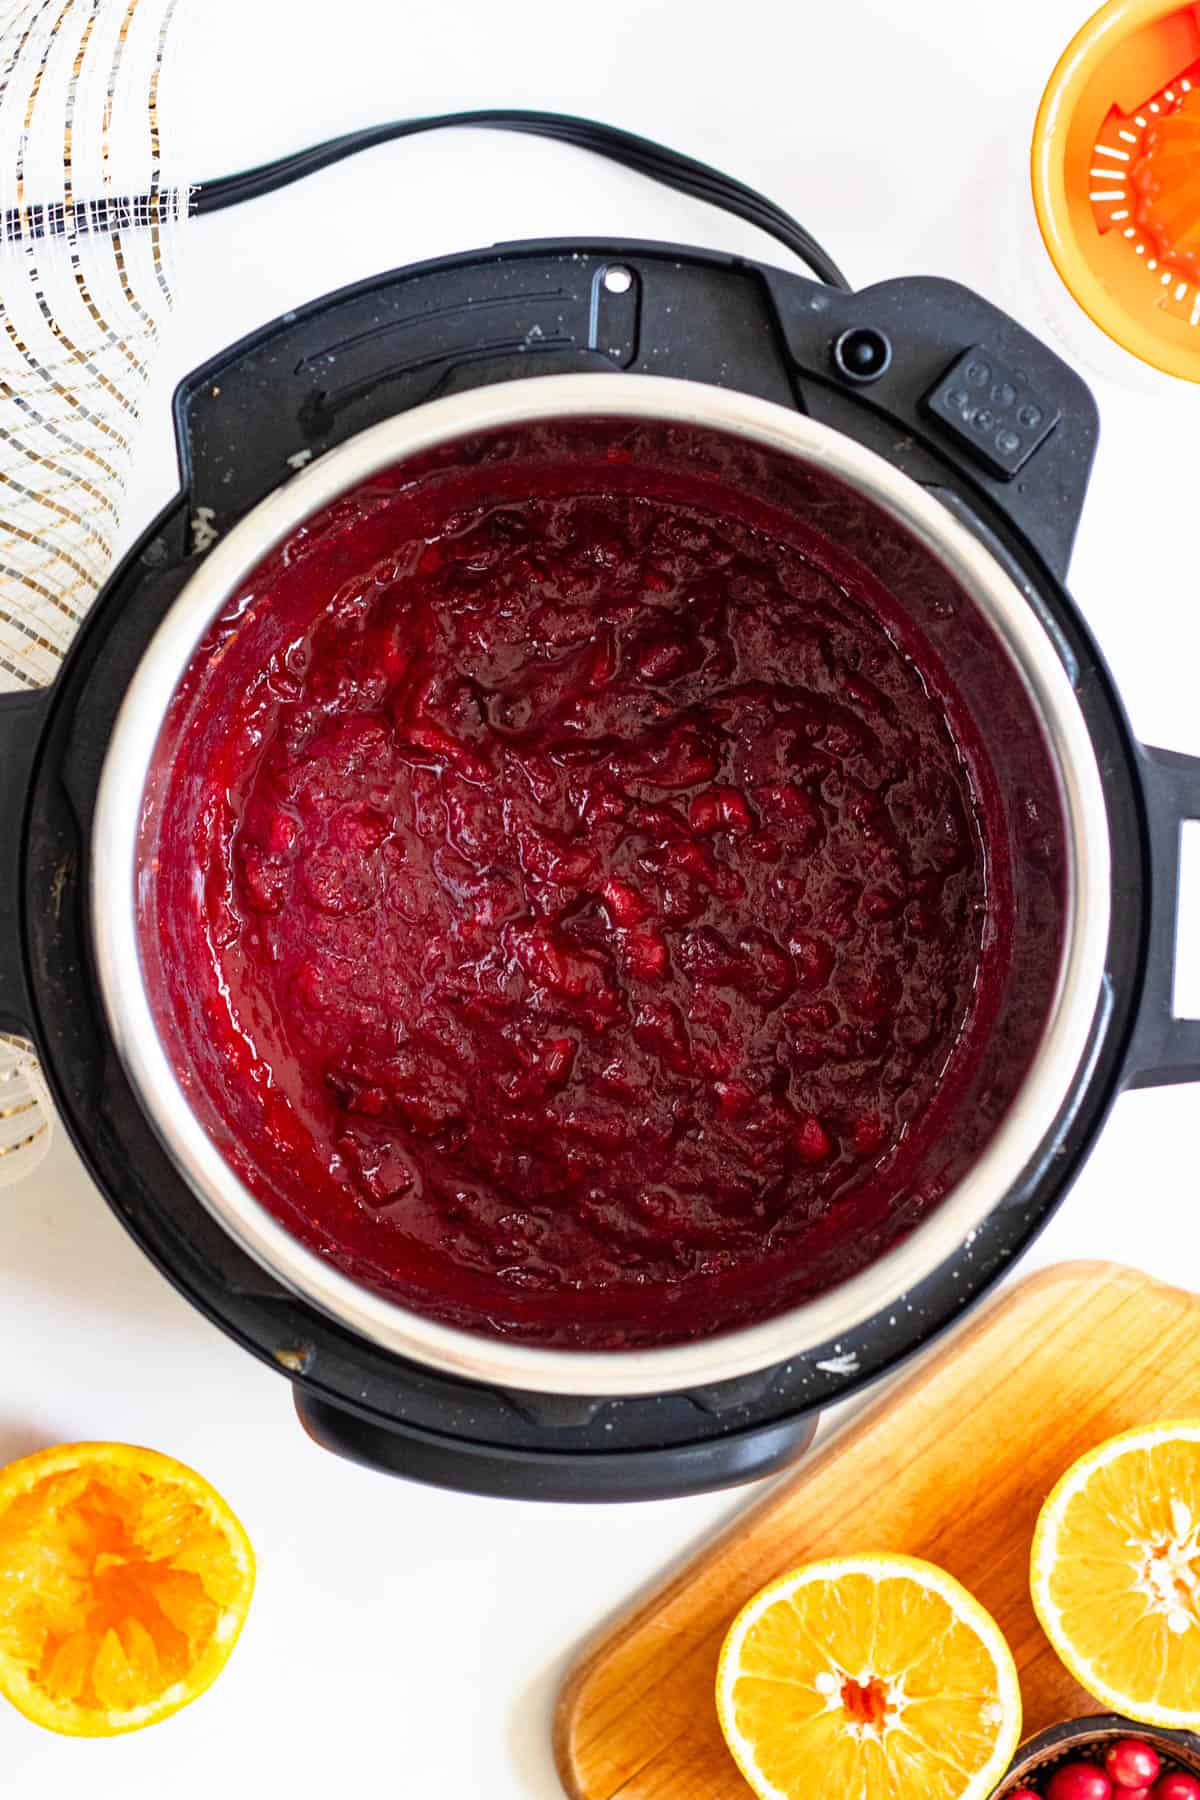 Cranberry sauce mixed well after cooking in the instant pot. 